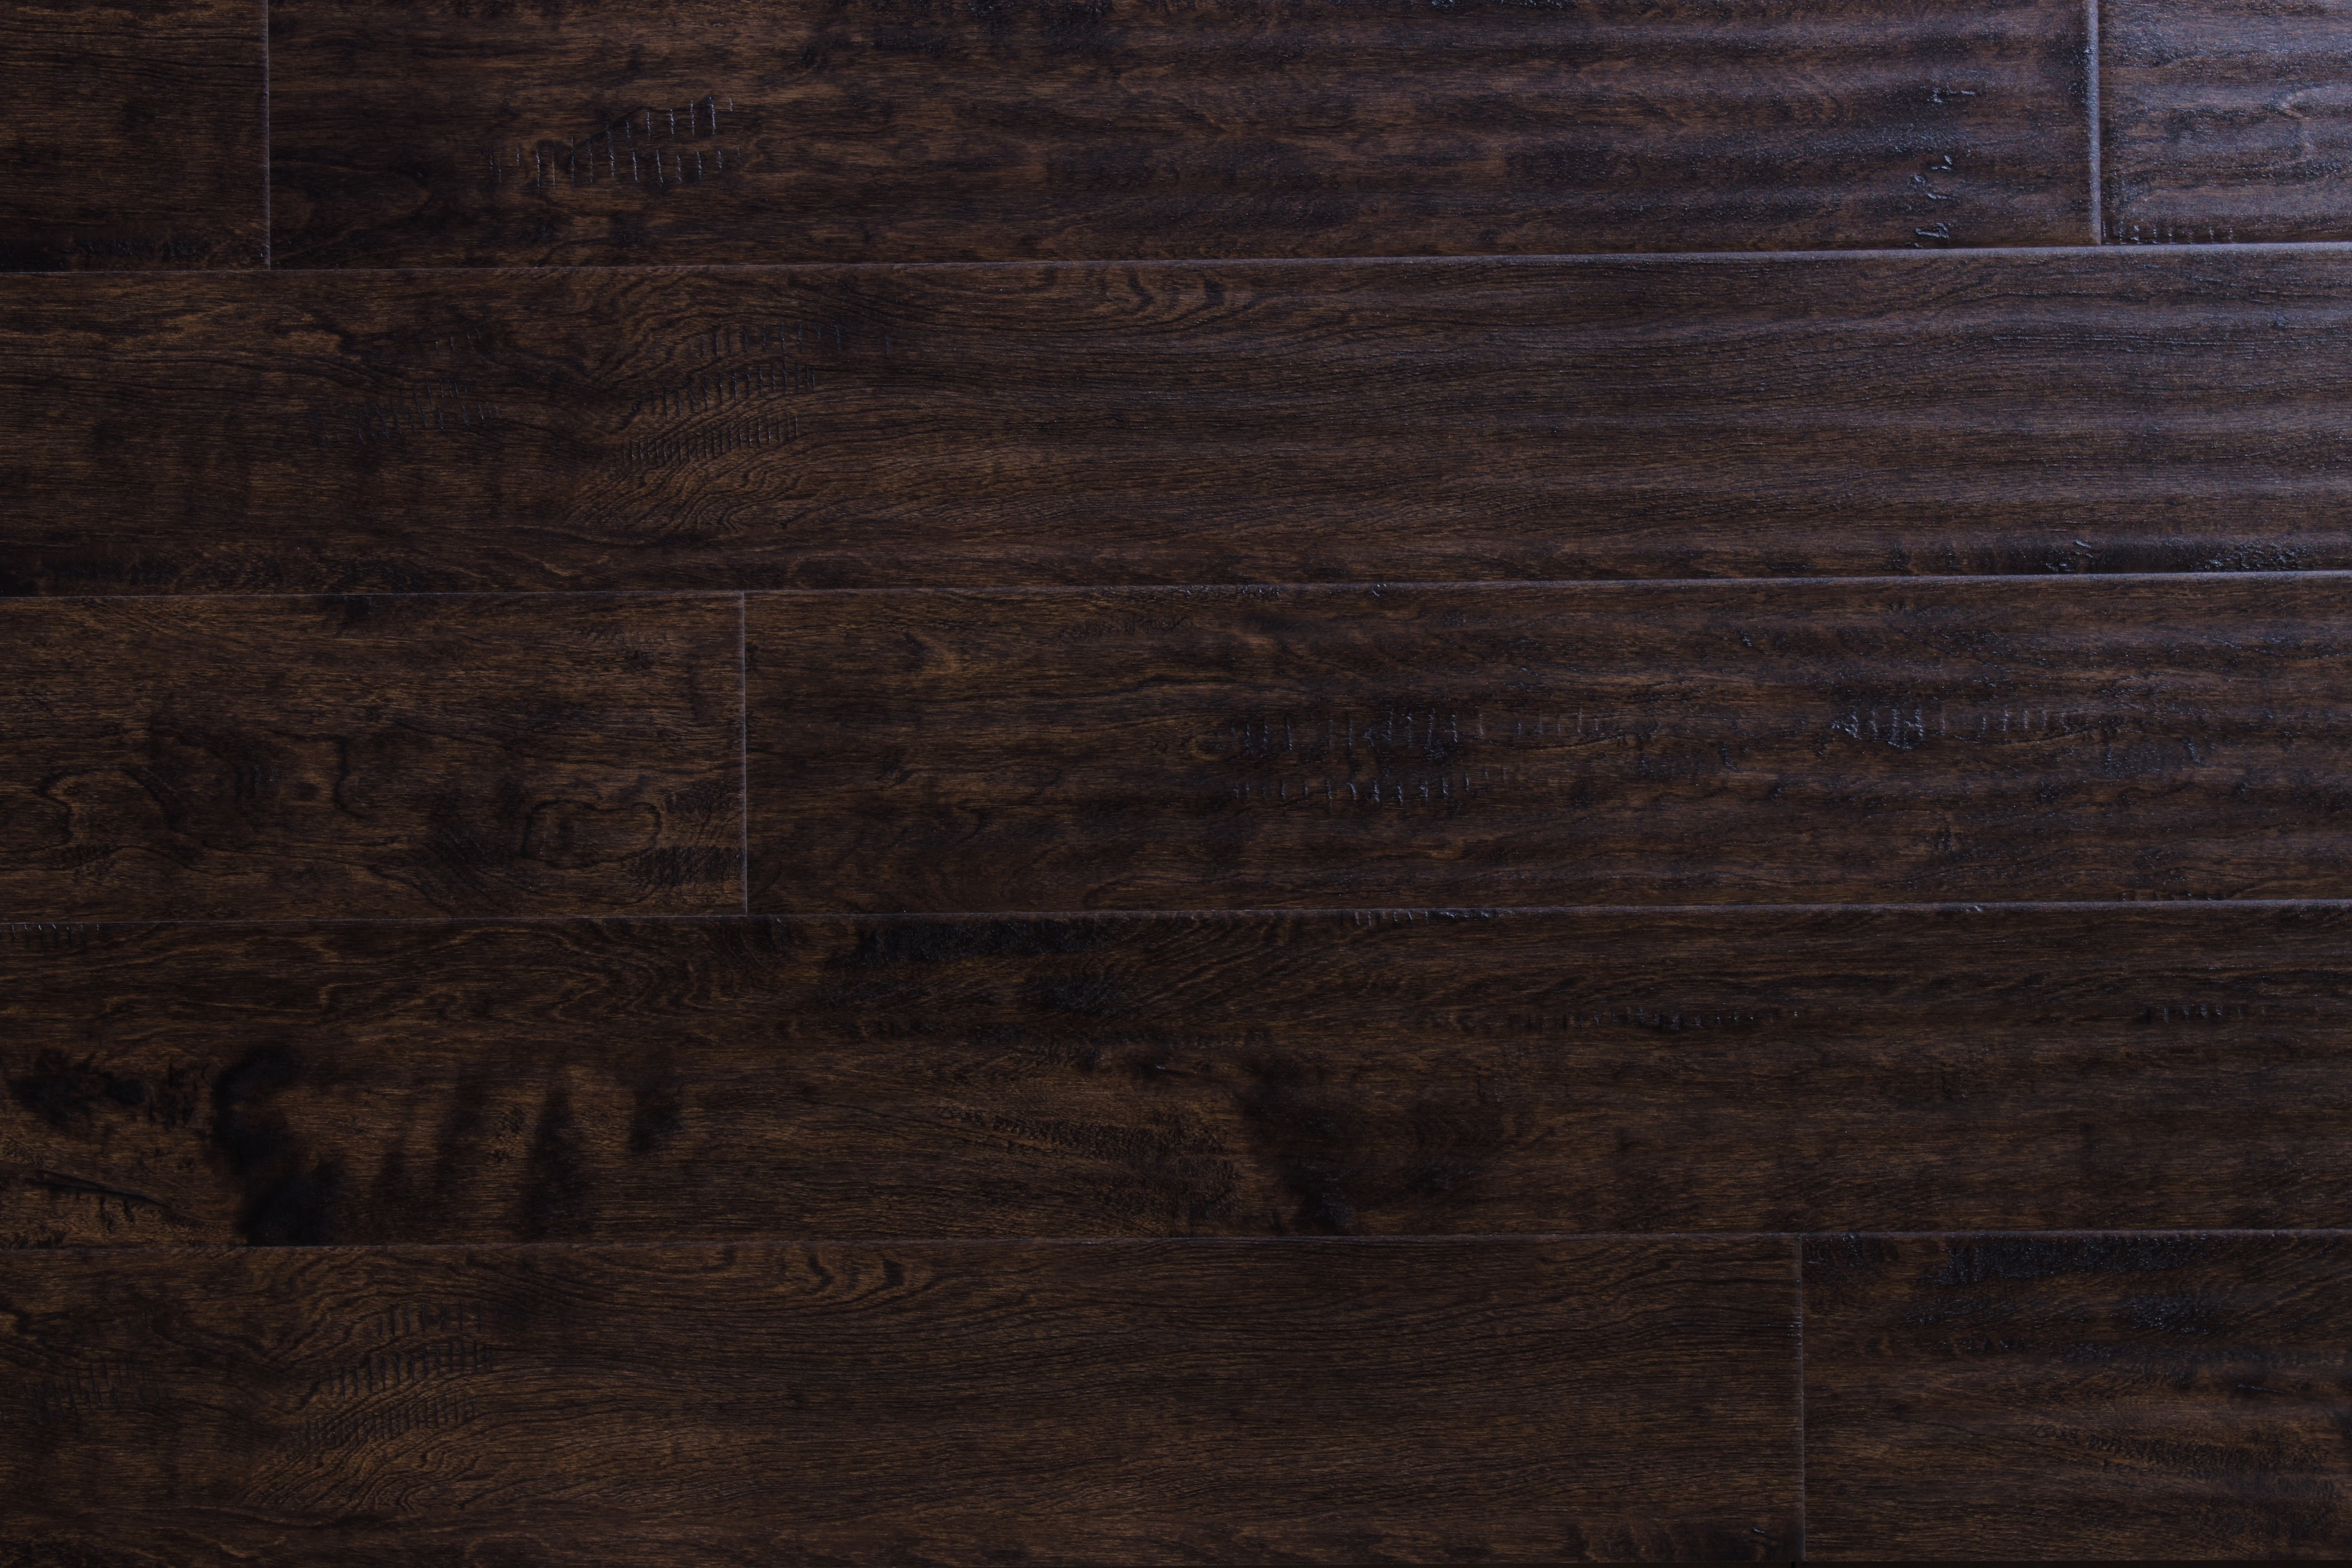 11 Lovable Hardwood Flooring Denver Co 2024 free download hardwood flooring denver co of wood flooring free samples available at builddirecta pertaining to tailor multi gb 5874277bb8d3c